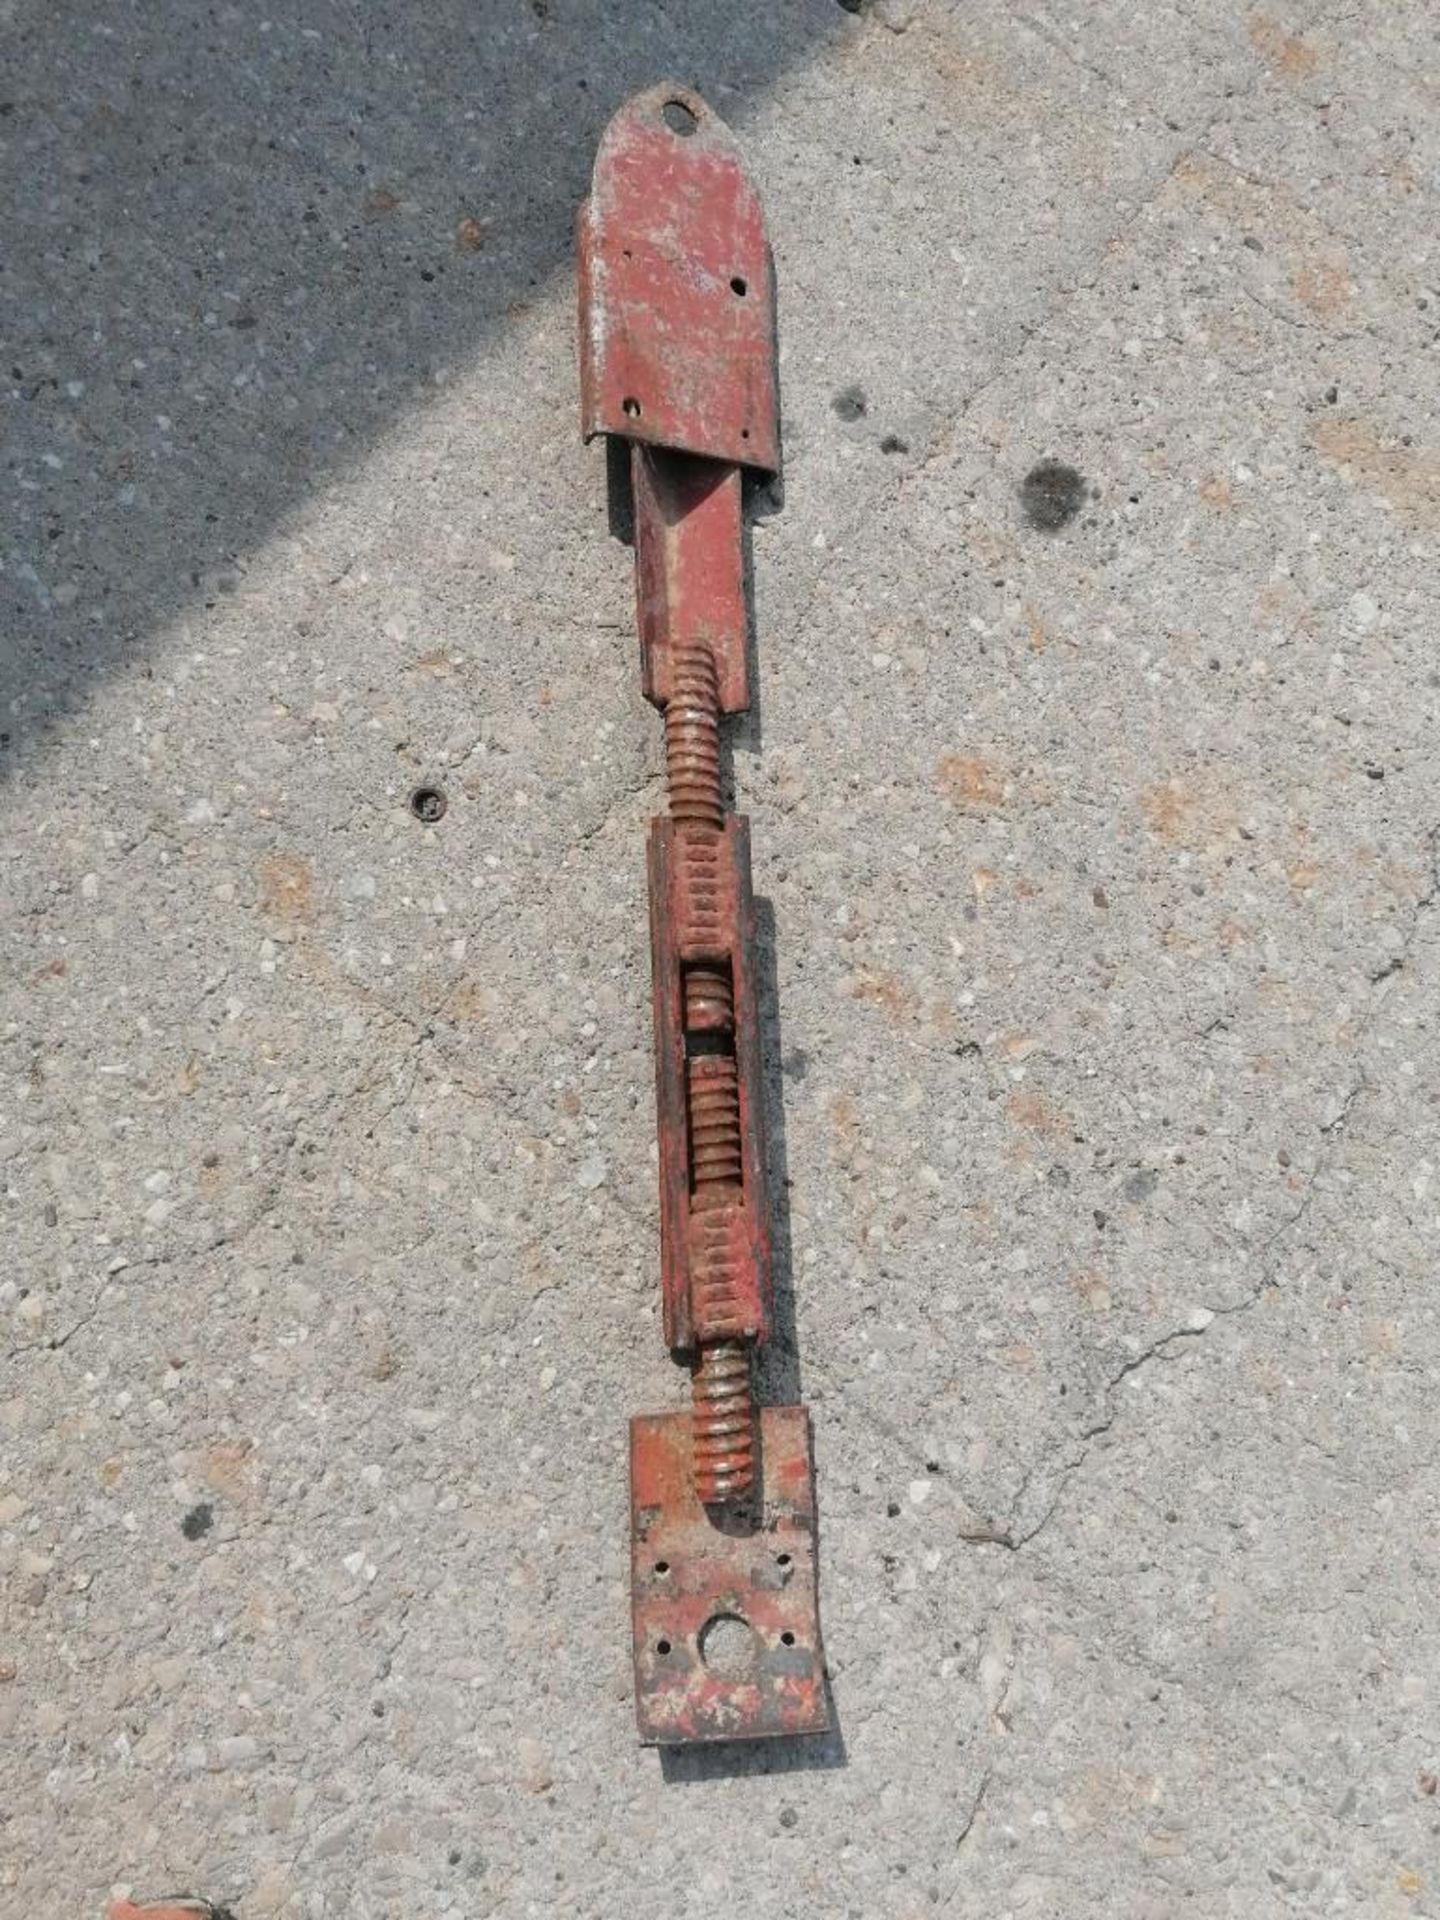 KNAACK Job Box Model 2472 with (50) Turnbuckles. Located at 301 E Henry Street, Mt. Pleasant, IA - Image 4 of 4